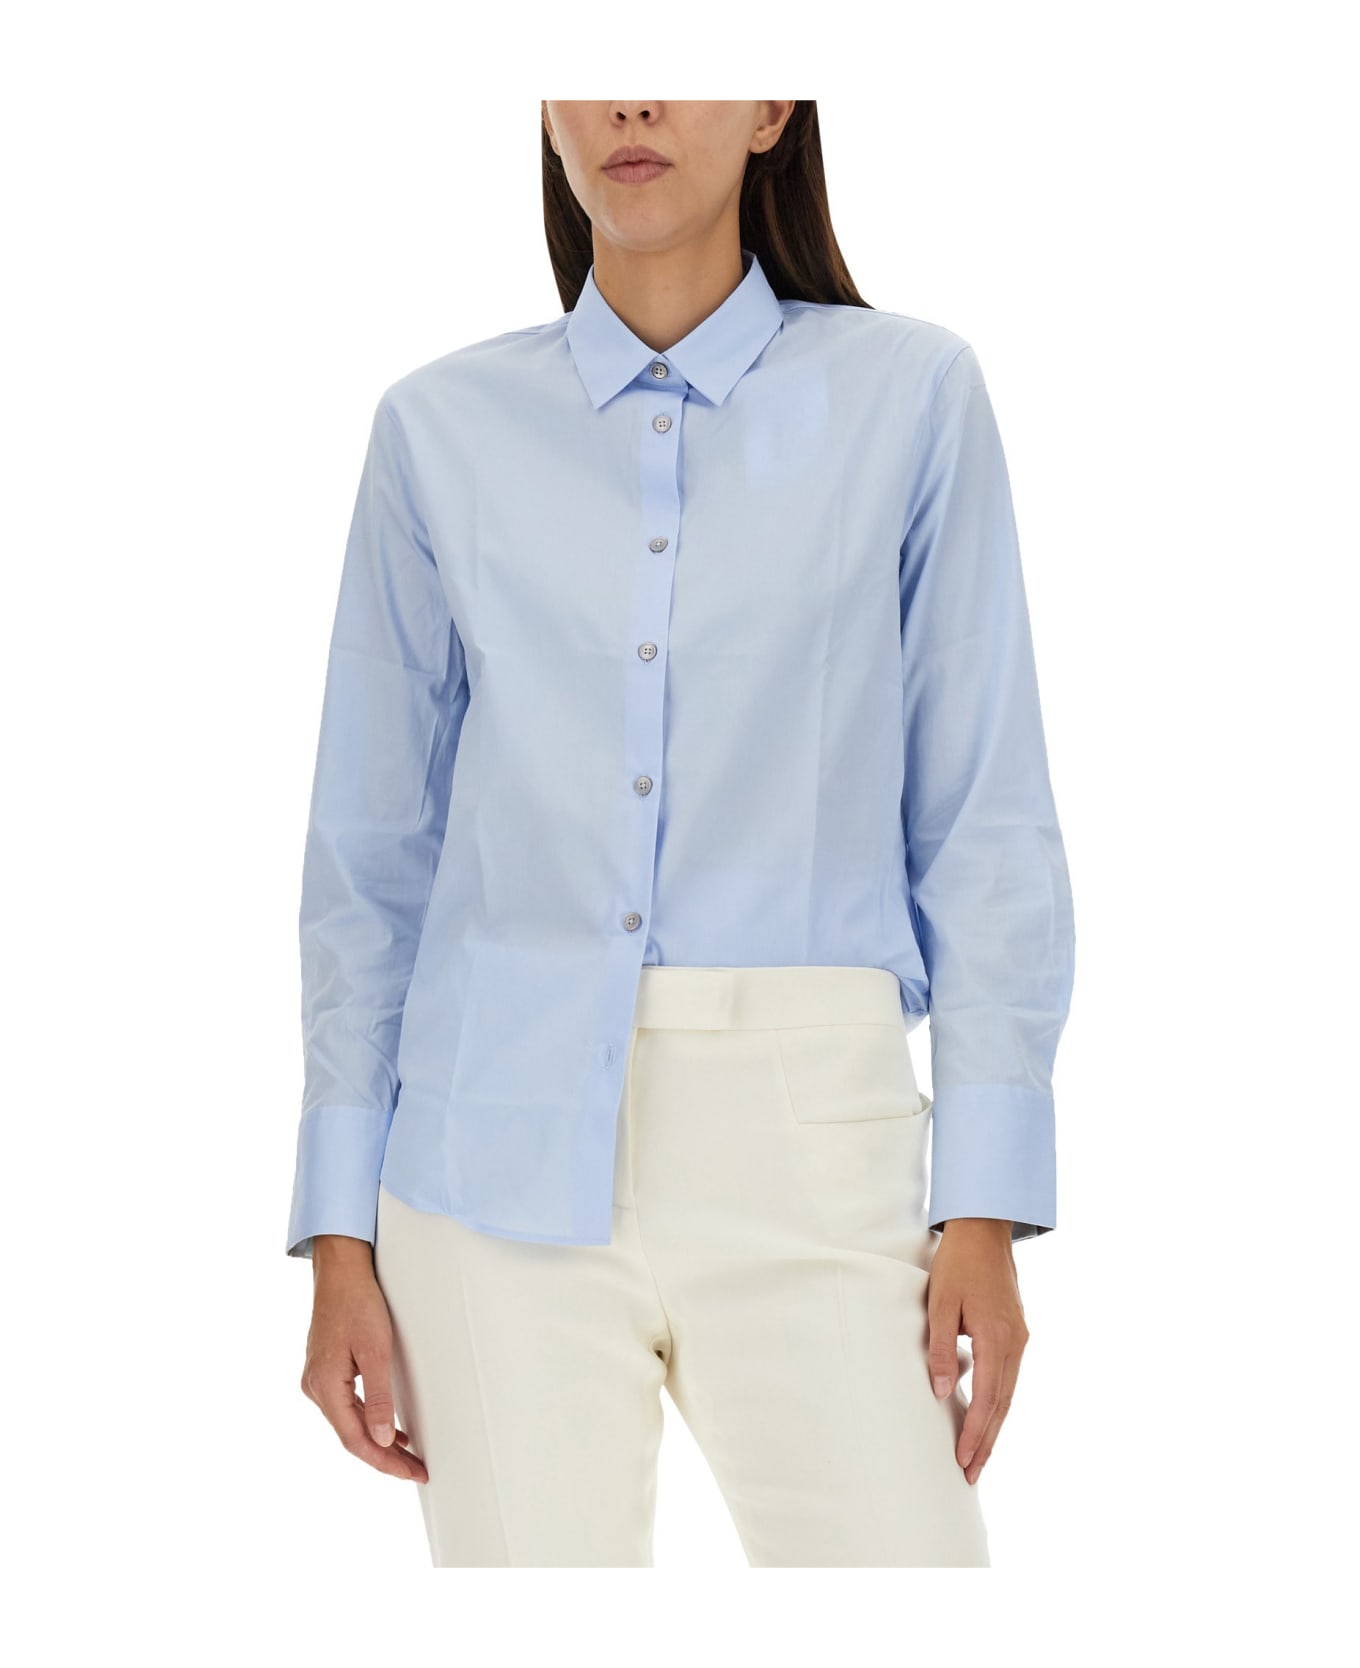 PS by Paul Smith Regular Fit Shirt - BLU